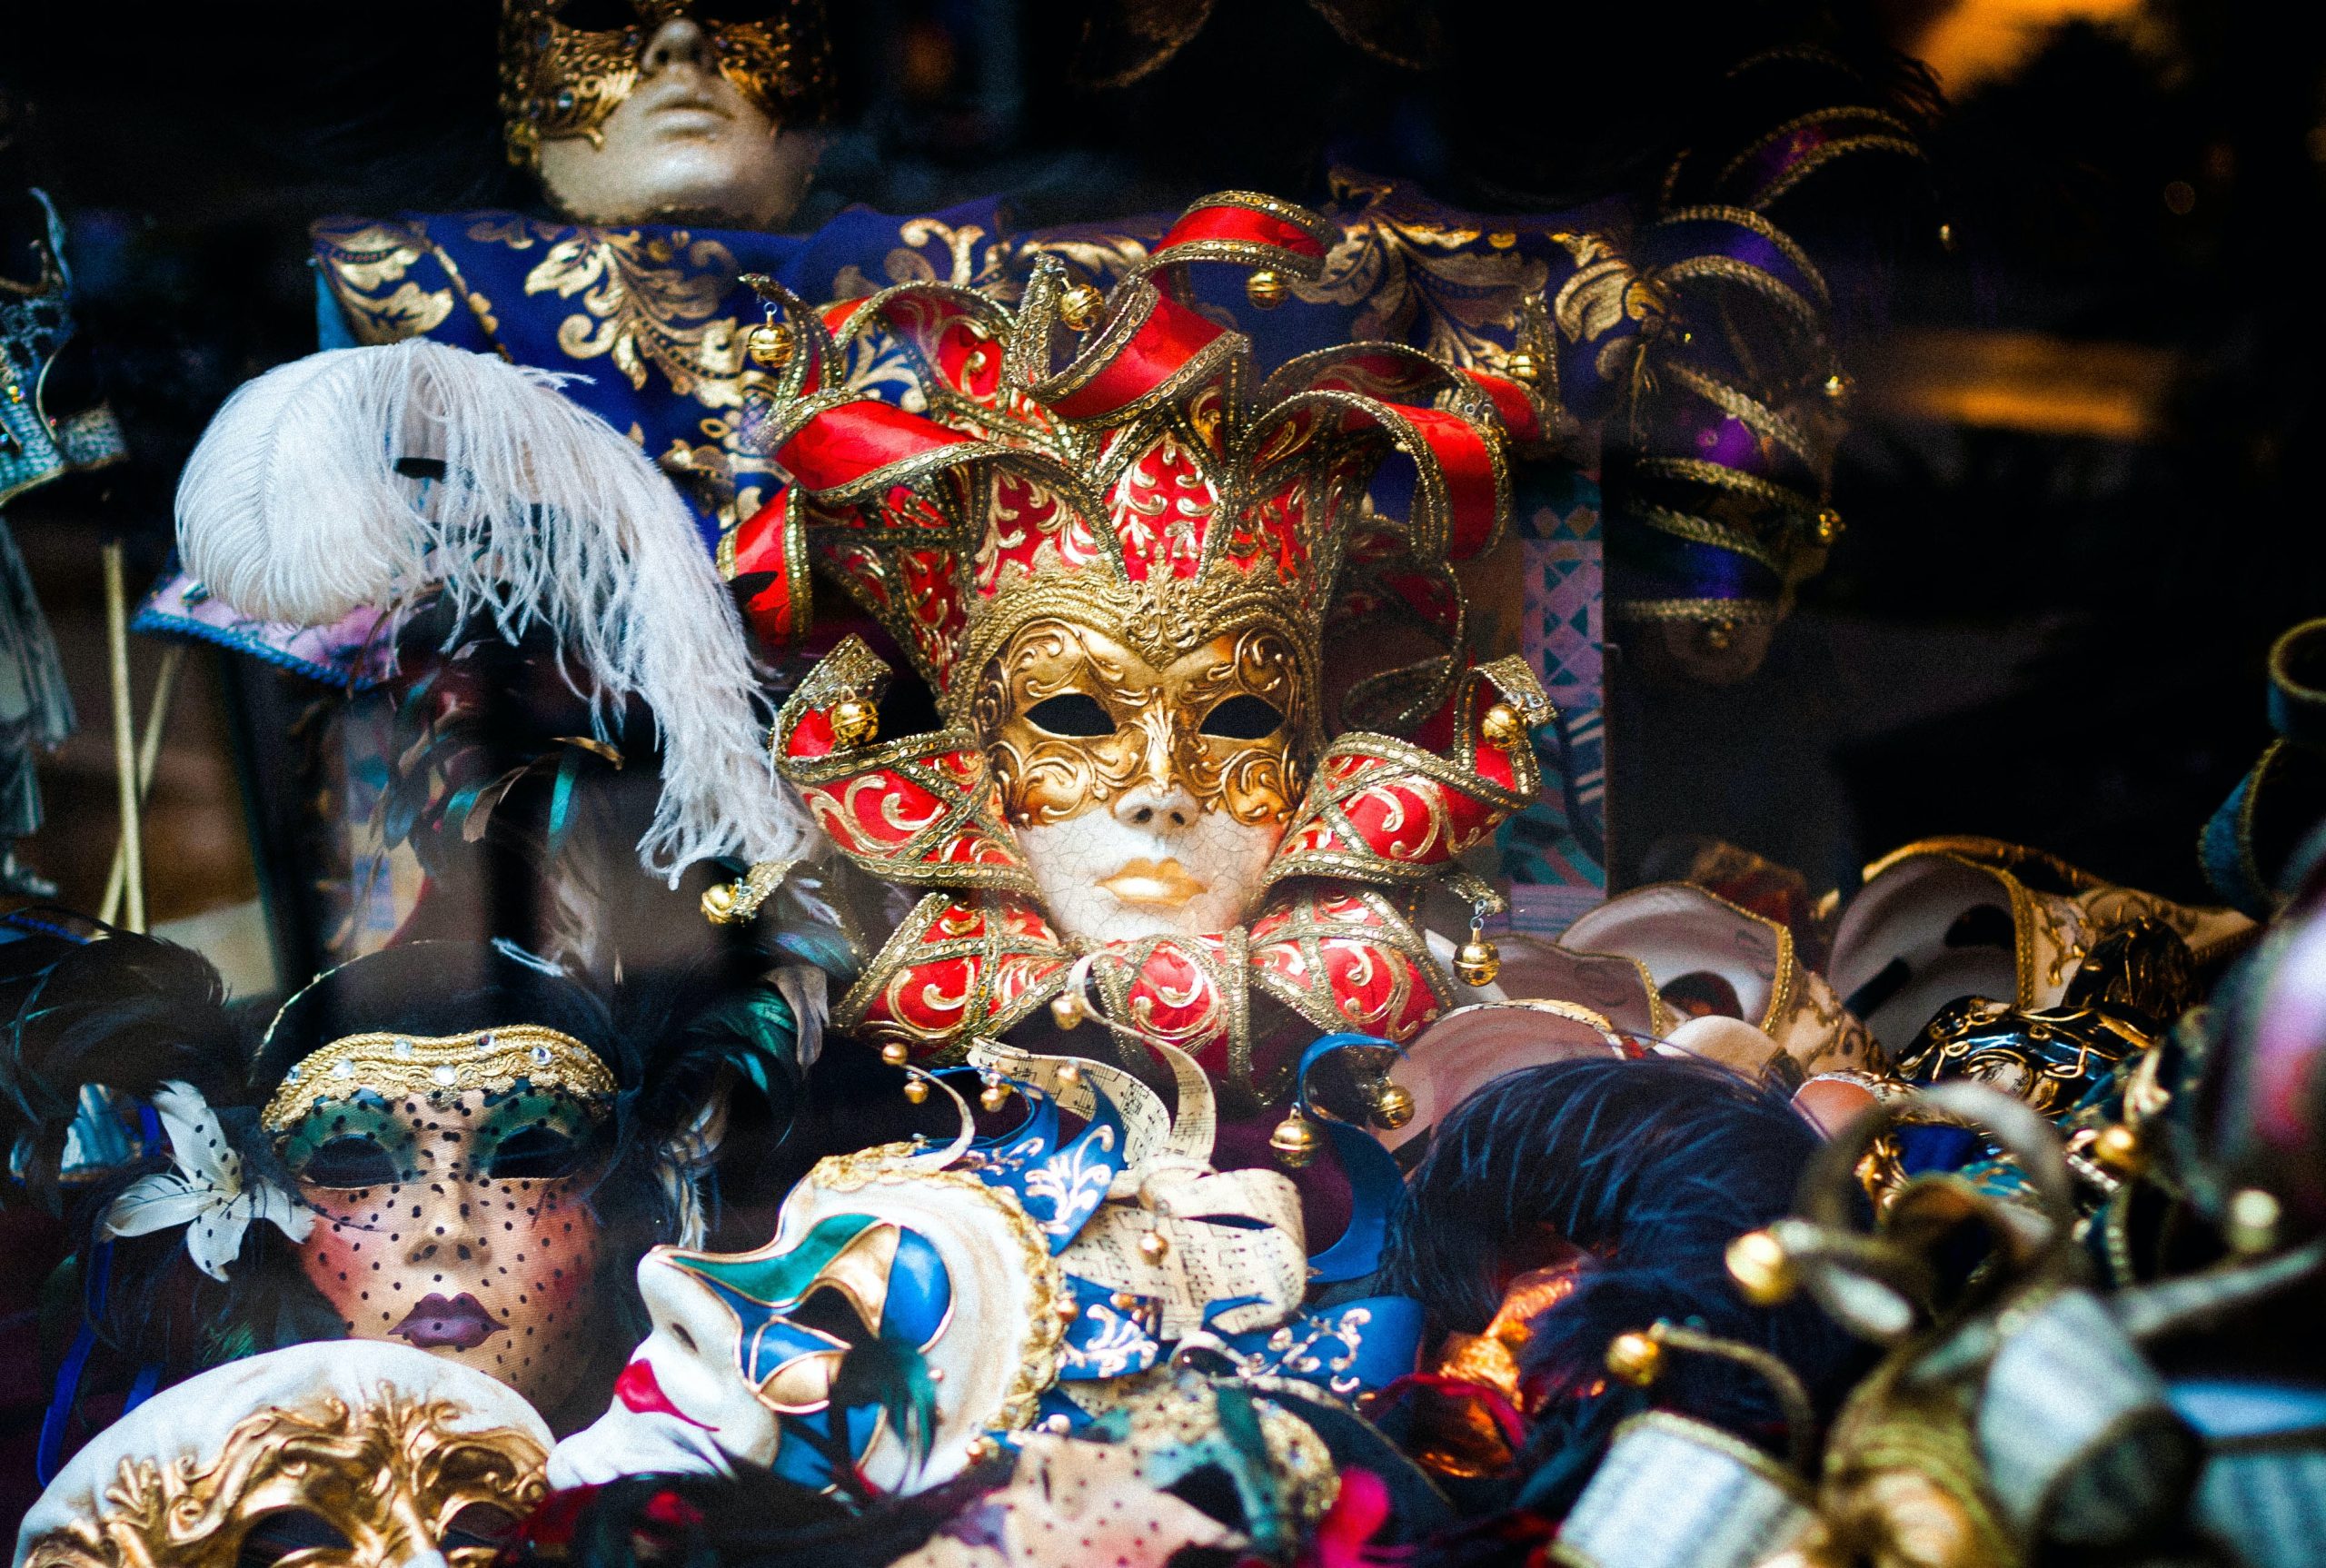 In an article about mardi gras, a pile of multi-colored Venetian masks.